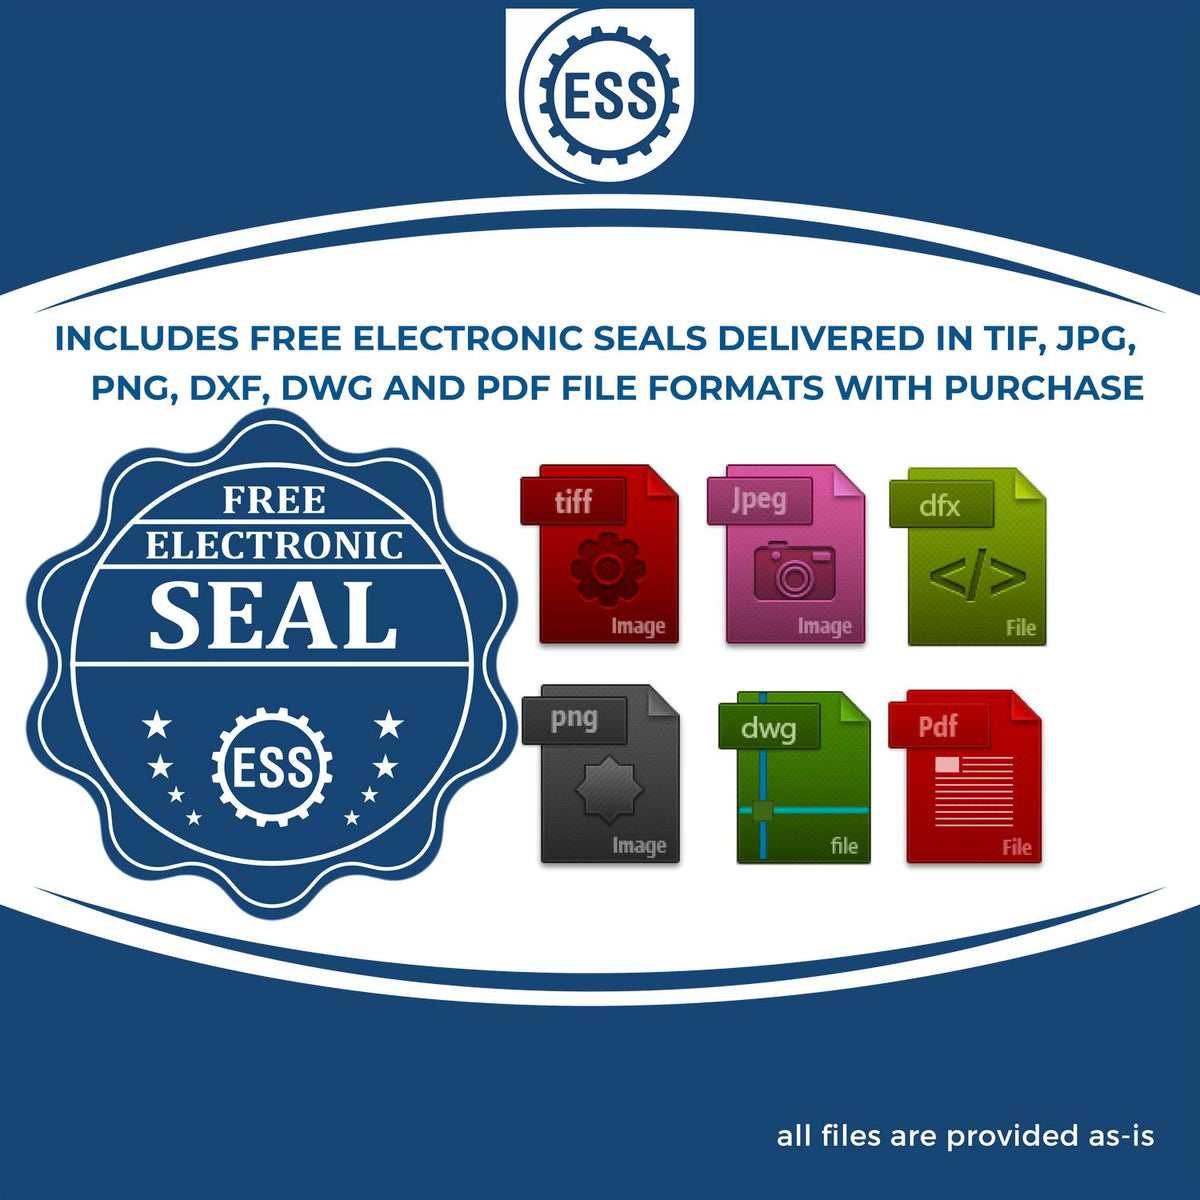 An infographic for the free electronic seal for the Hybrid Ohio Engineer Seal illustrating the different file type icons such as DXF, DWG, TIF, JPG and PNG.